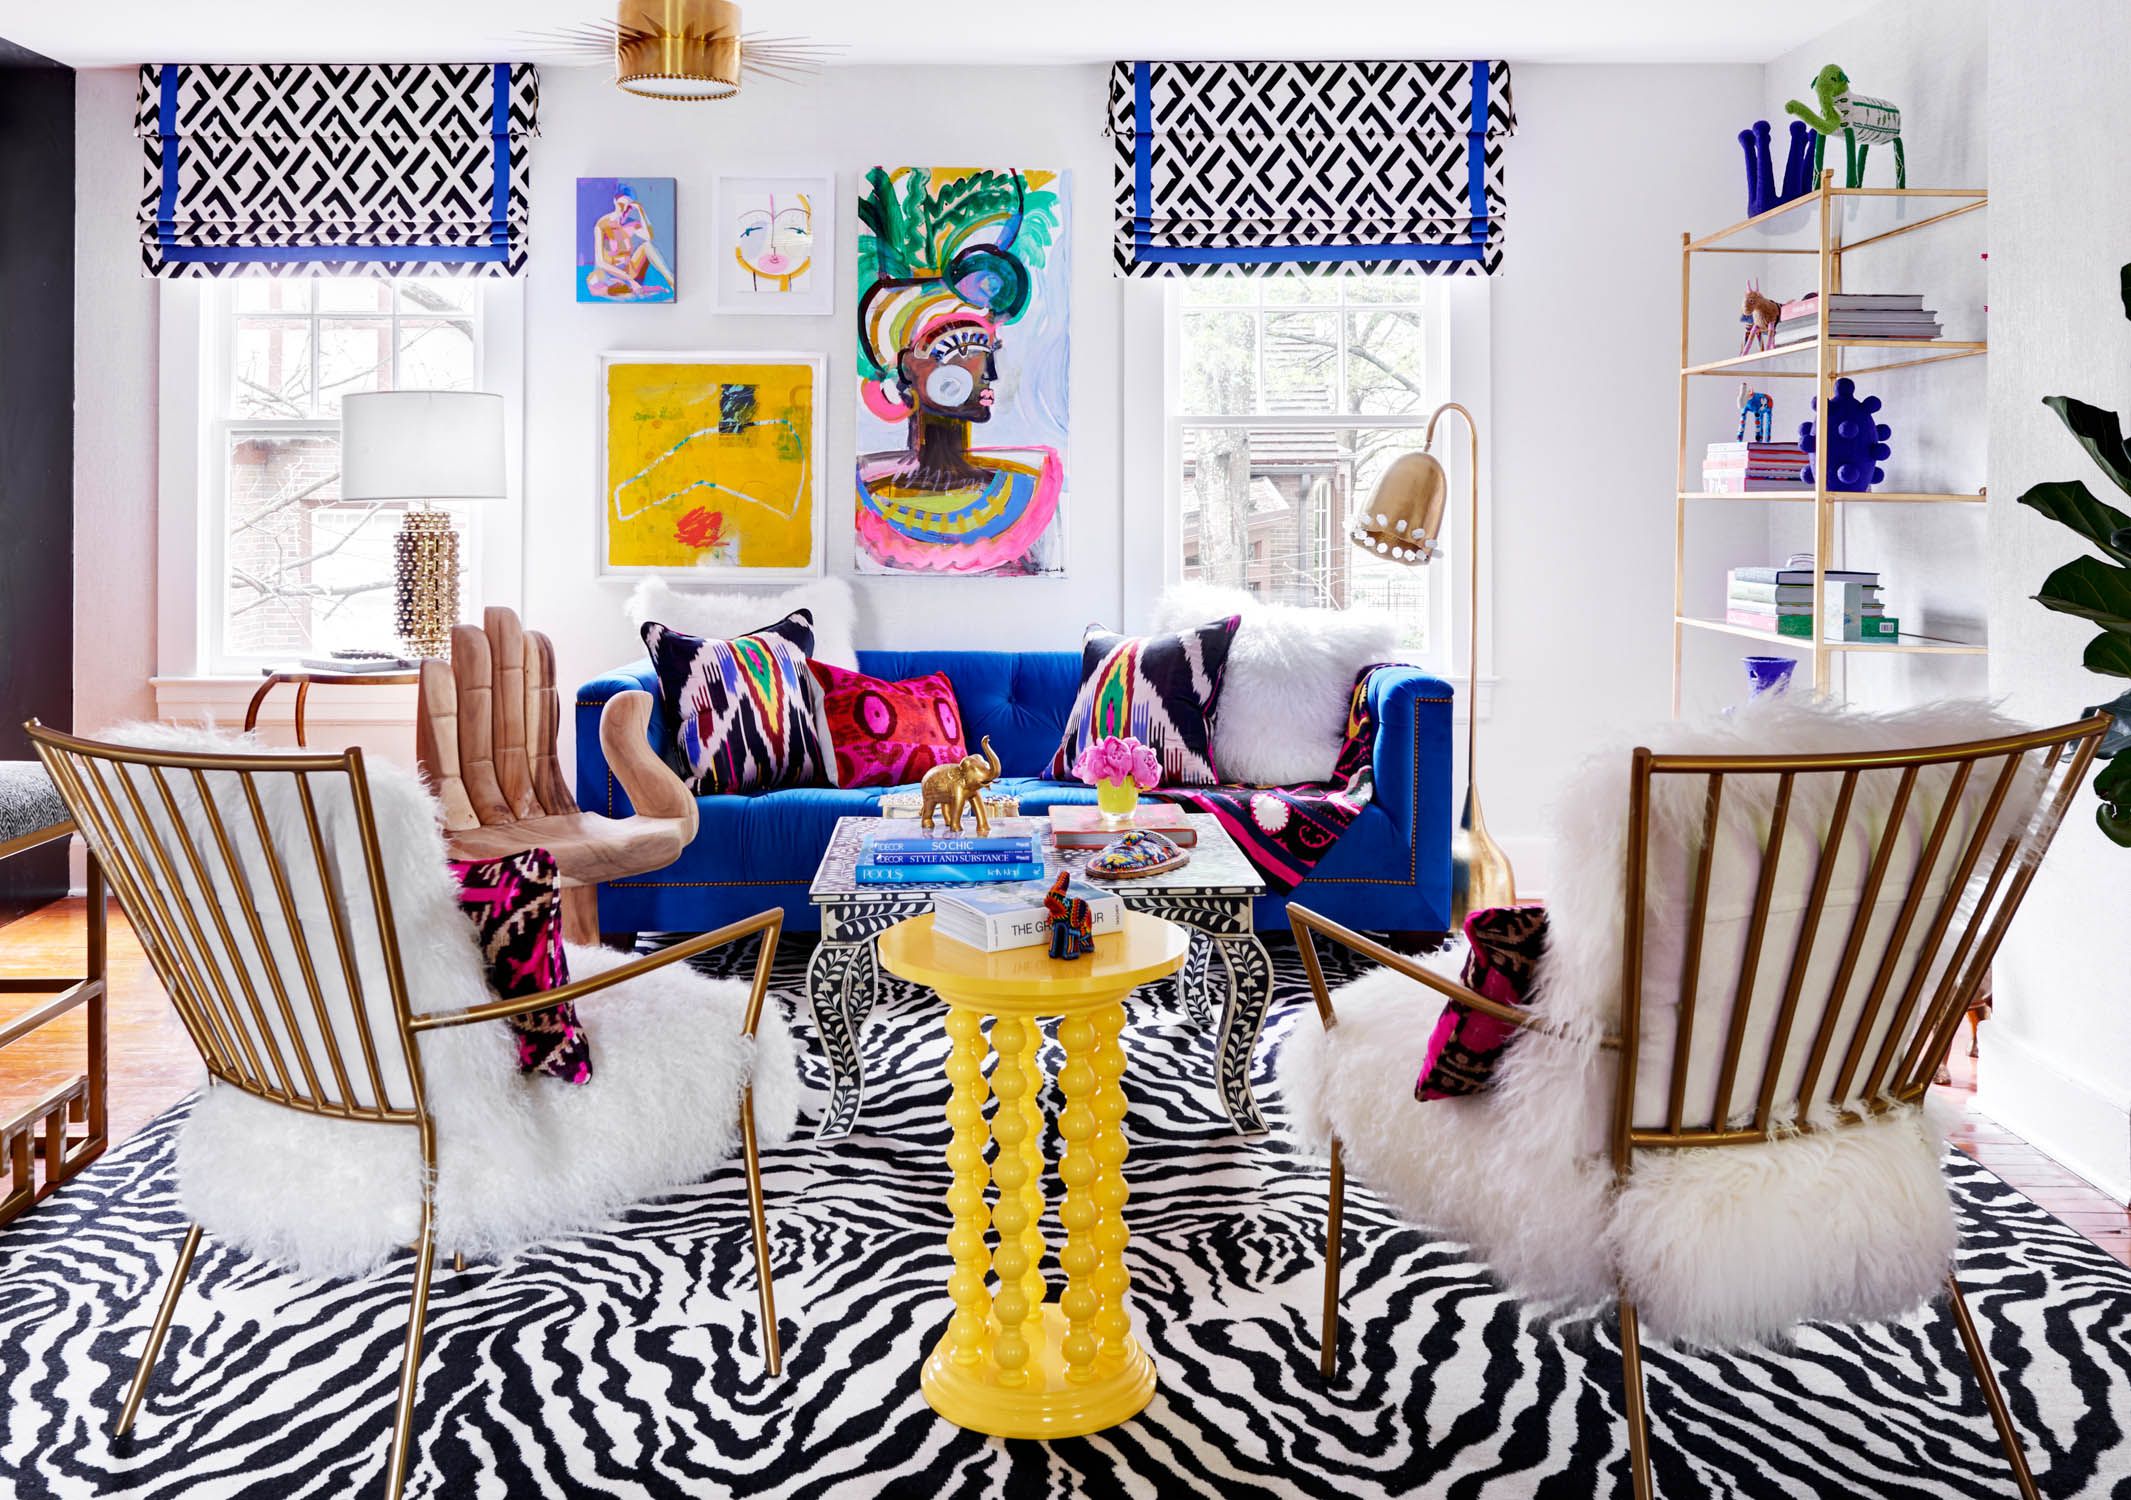 Room With Eclectic And Whimsical Decor